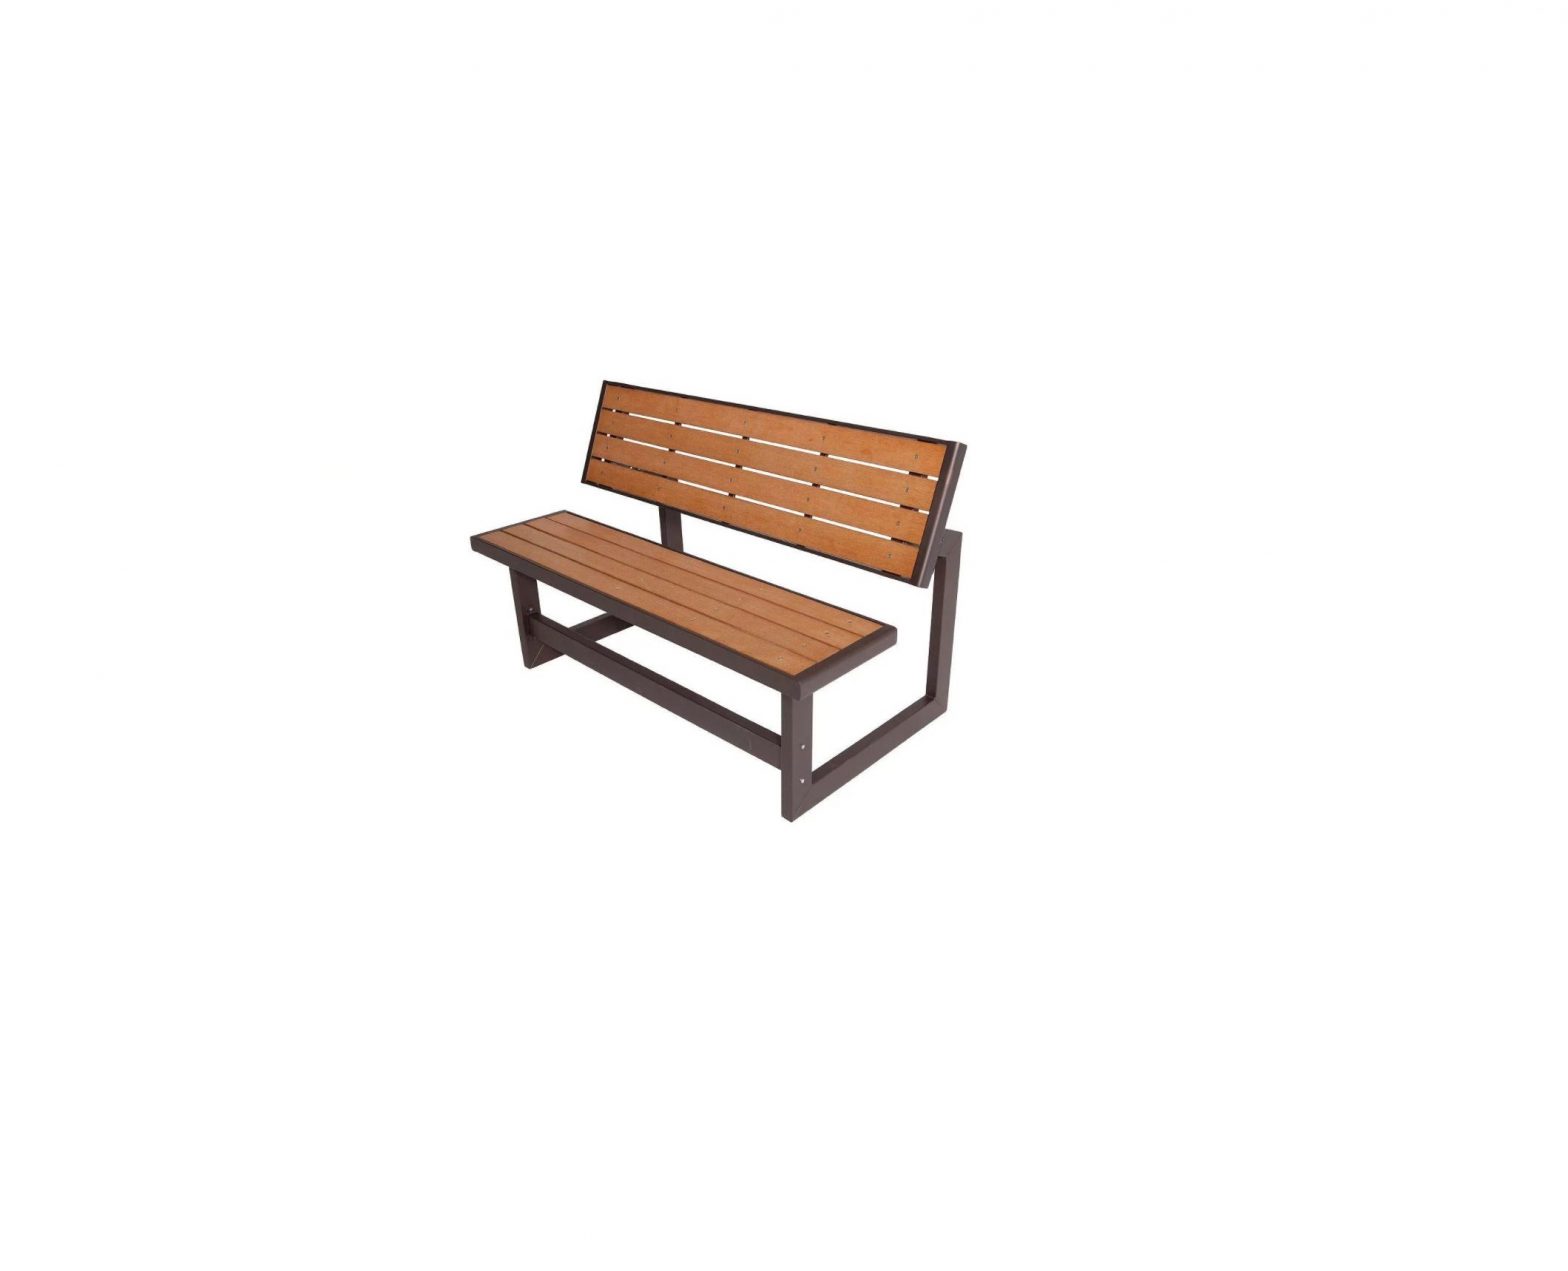 ULINE H-5947 Convertible Bench Installation Guide